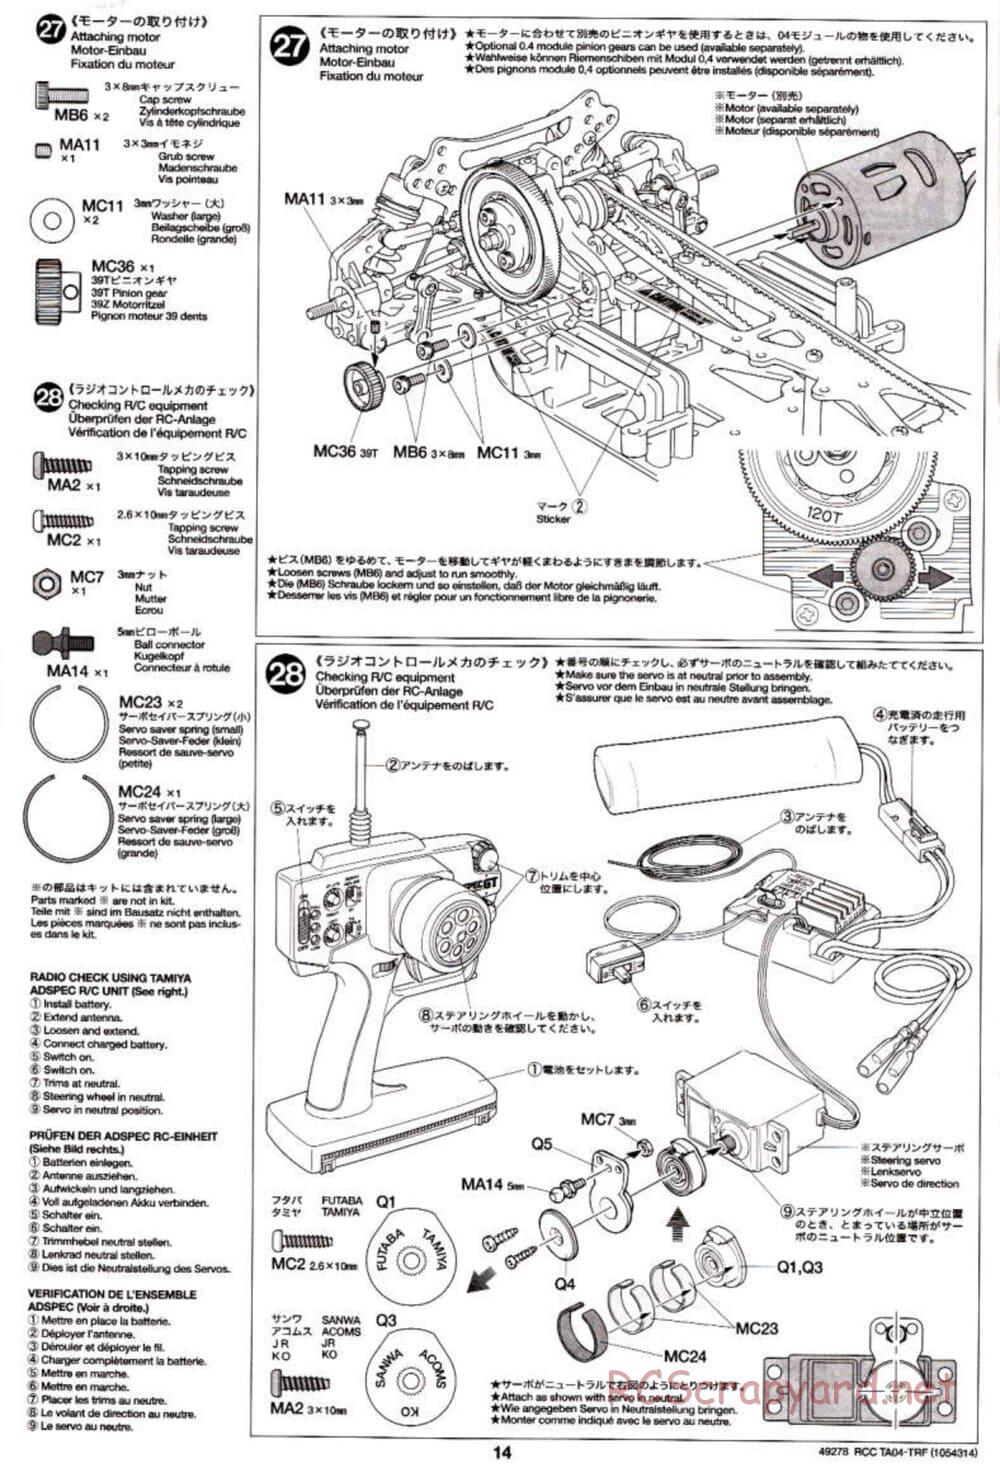 Tamiya - TA-04 TRF Special Chassis Chassis - Manual - Page 14